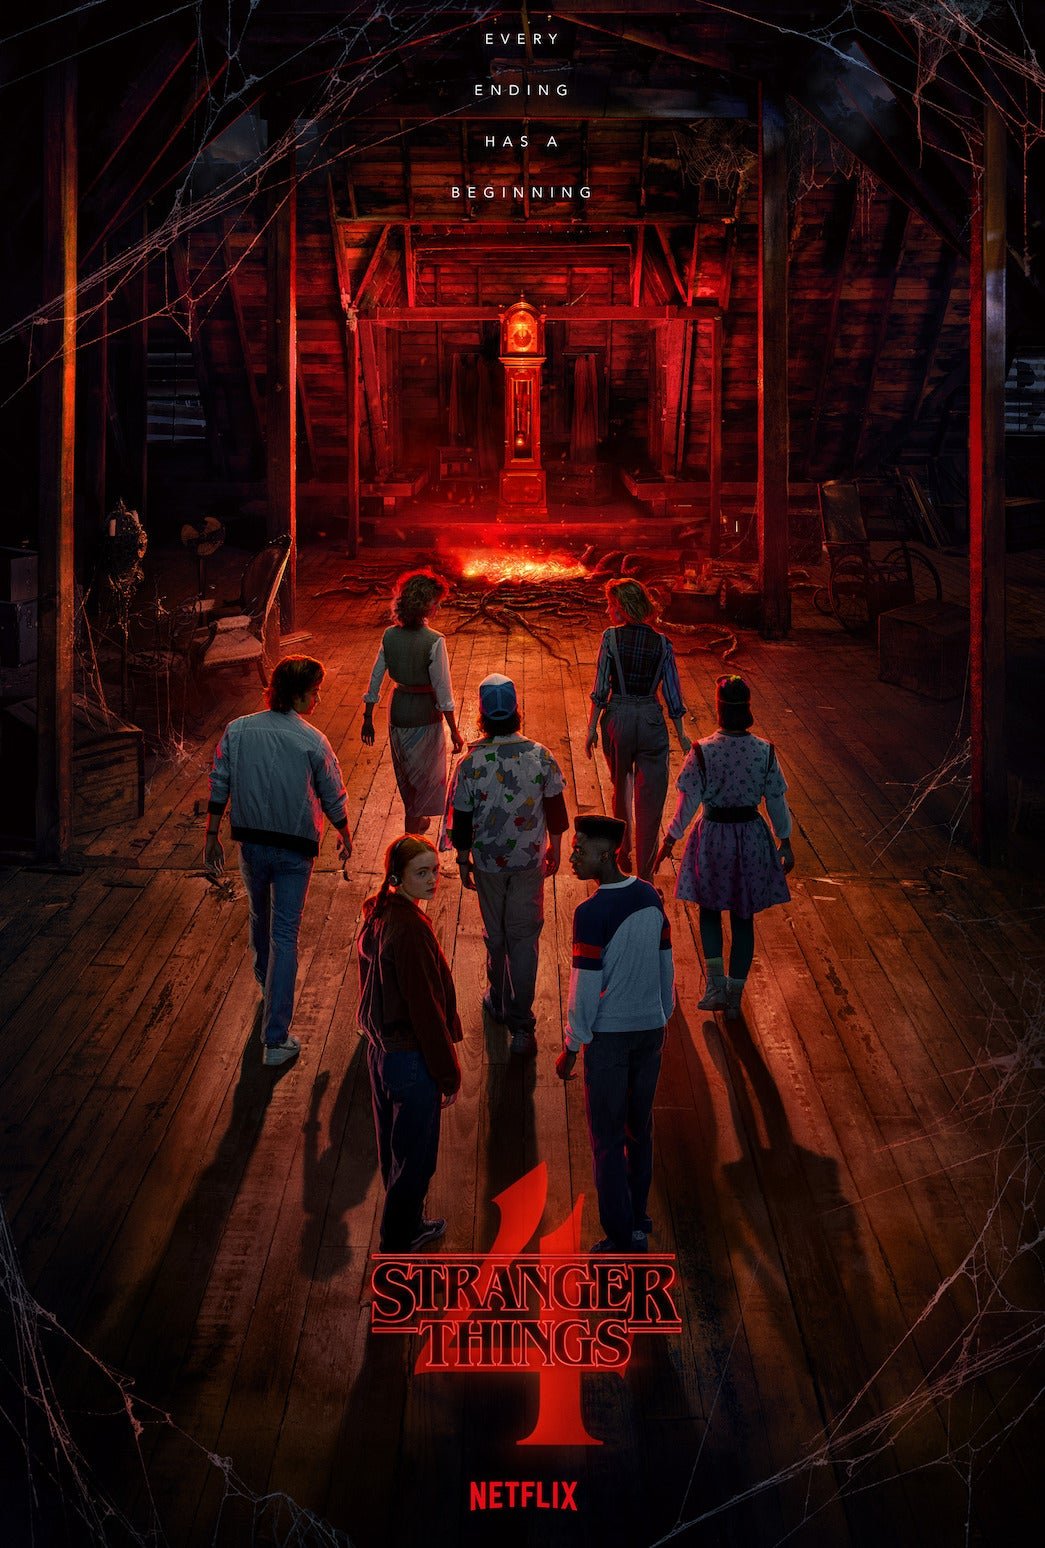 Stranger Things season 4 poster, featuring the cast of characters walking towards a red light